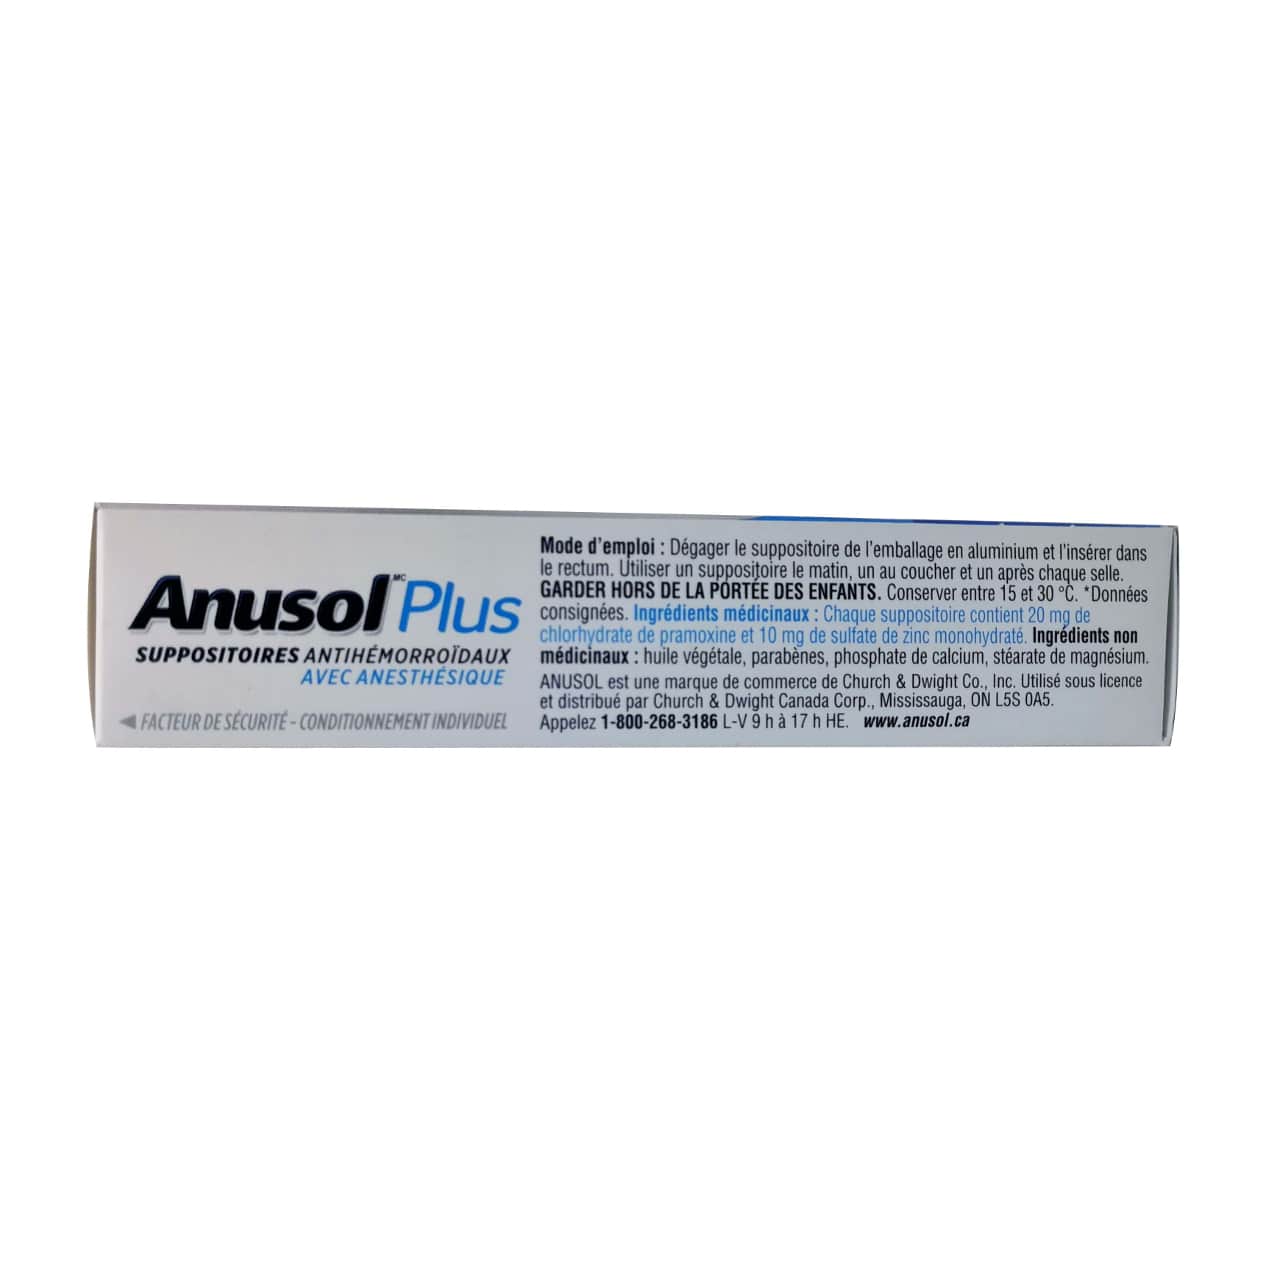 Directions and ingredients for Anusol Plus Hemorrhoidal Suppositories with Anesthetic (12 suppositories) in French